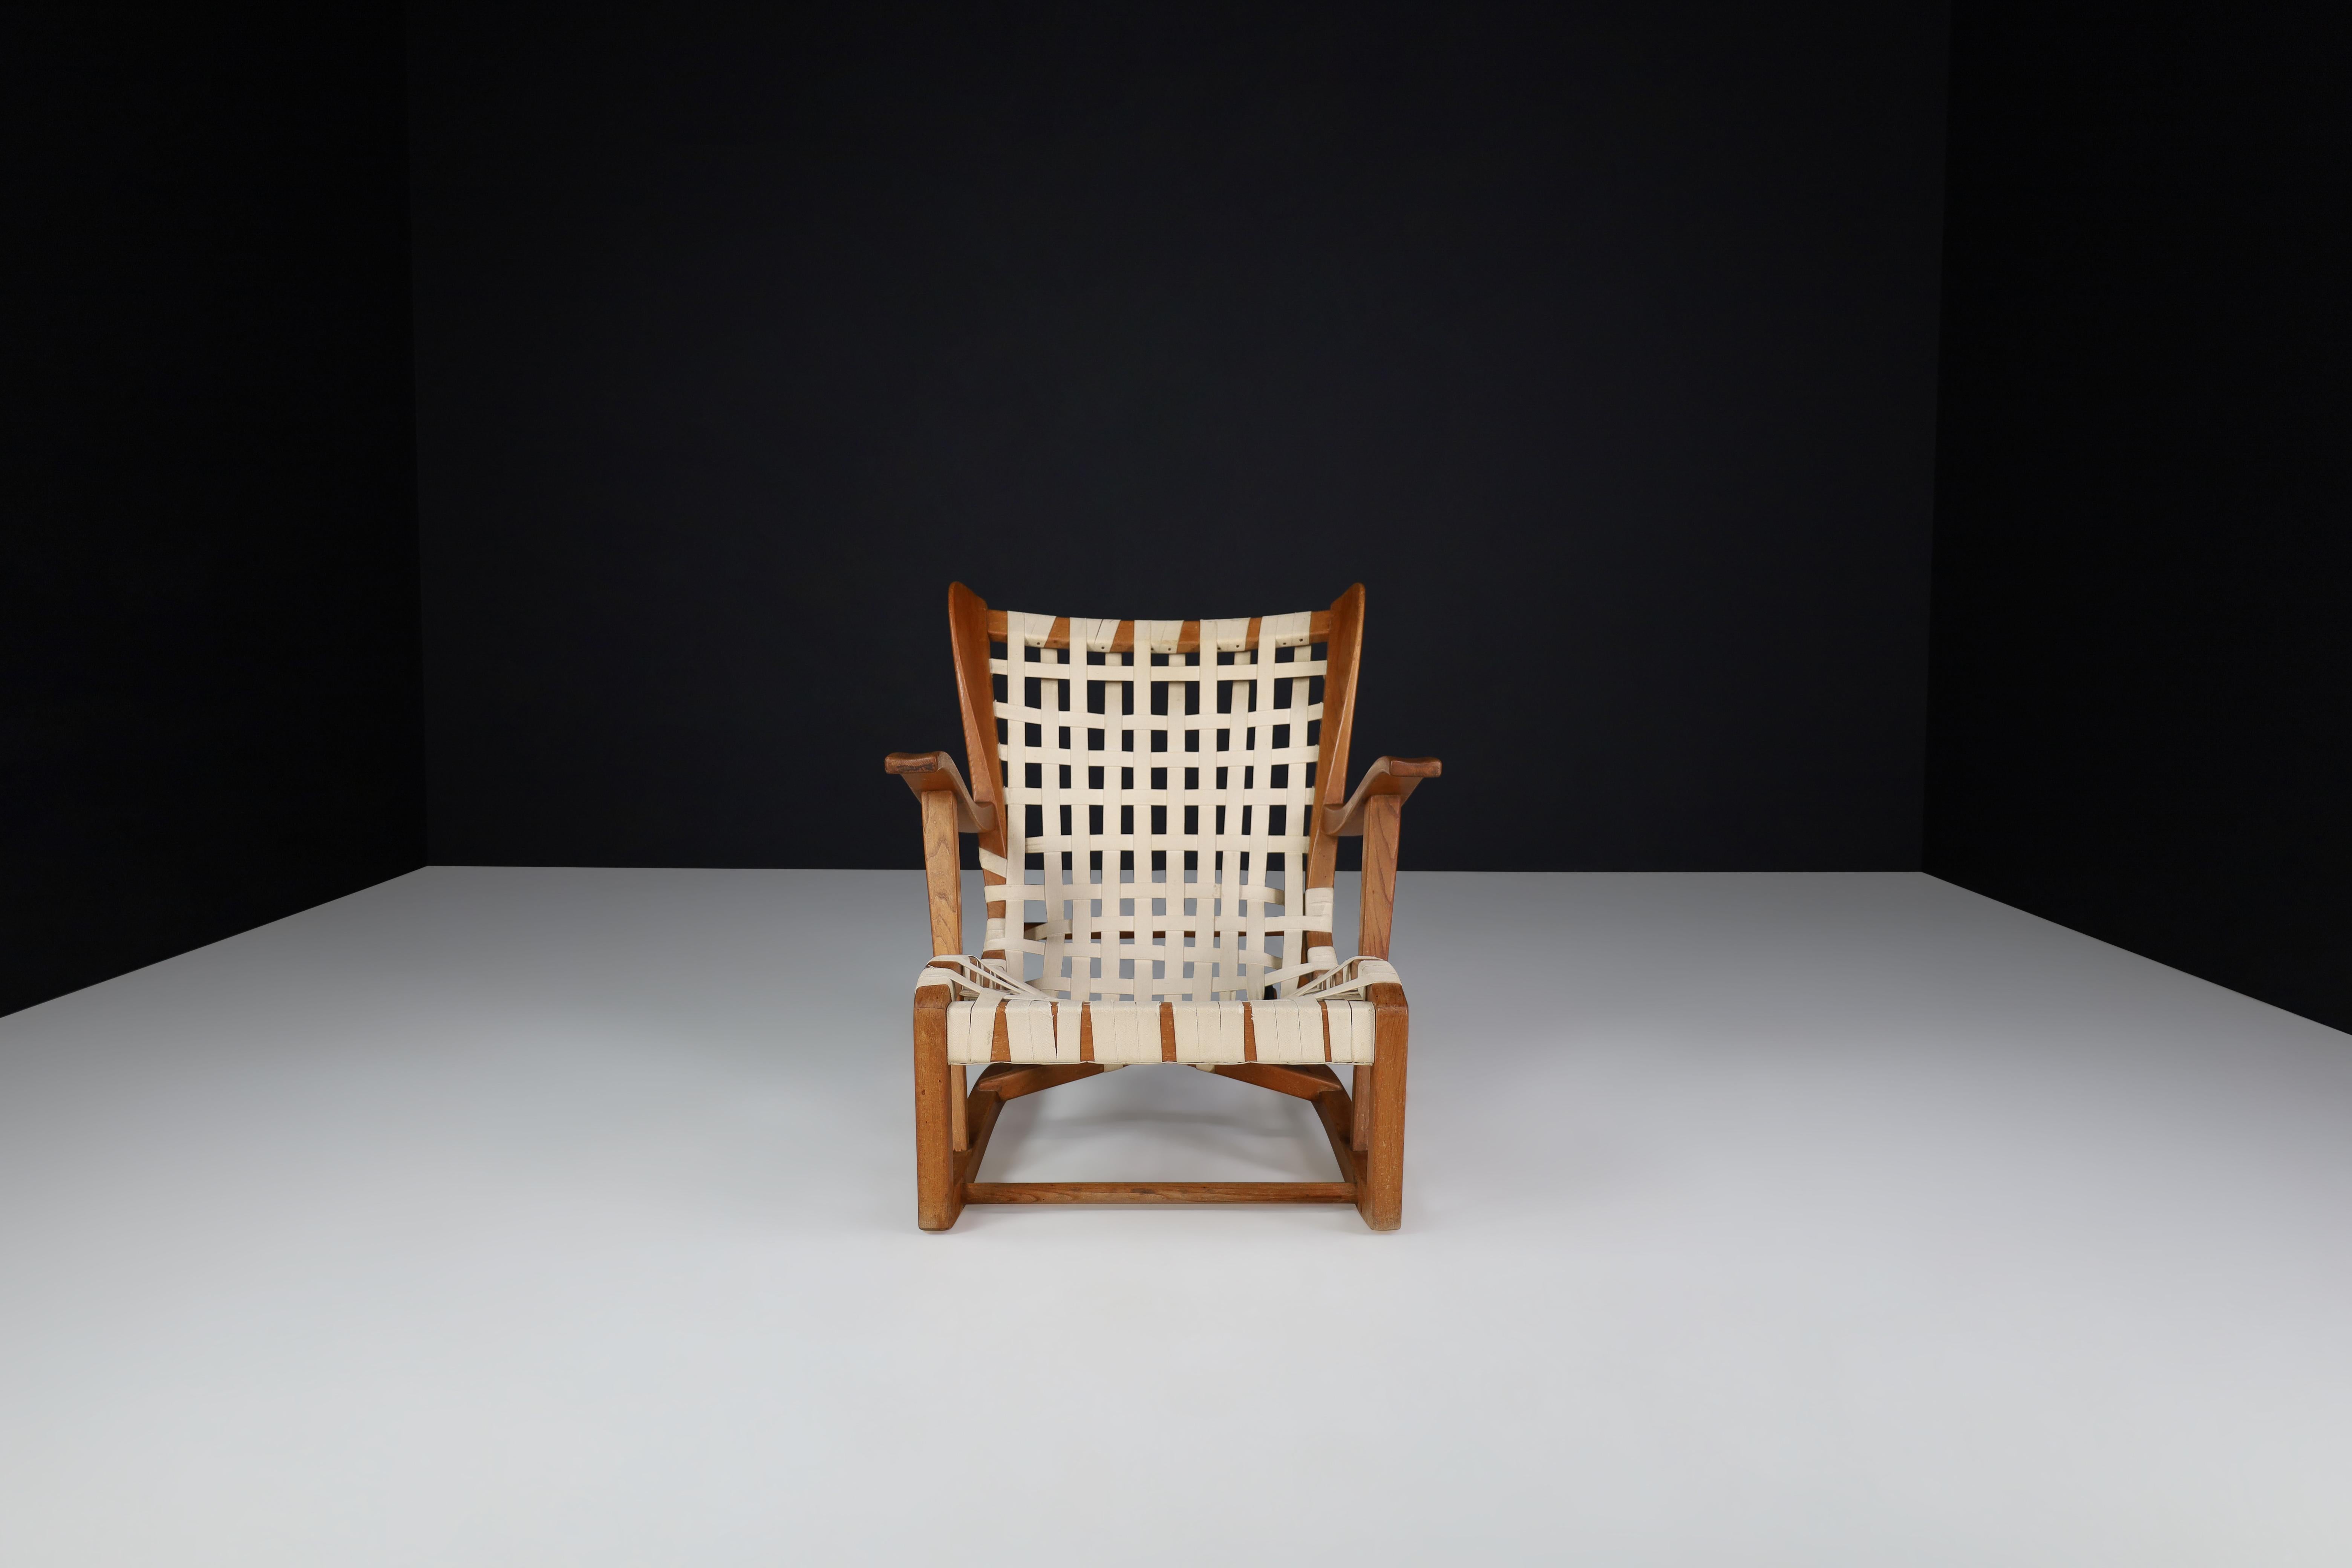 Sculptural Oak Lounge Chair by Guglielmo Pecorini, Italy, the 1950s For Sale 1